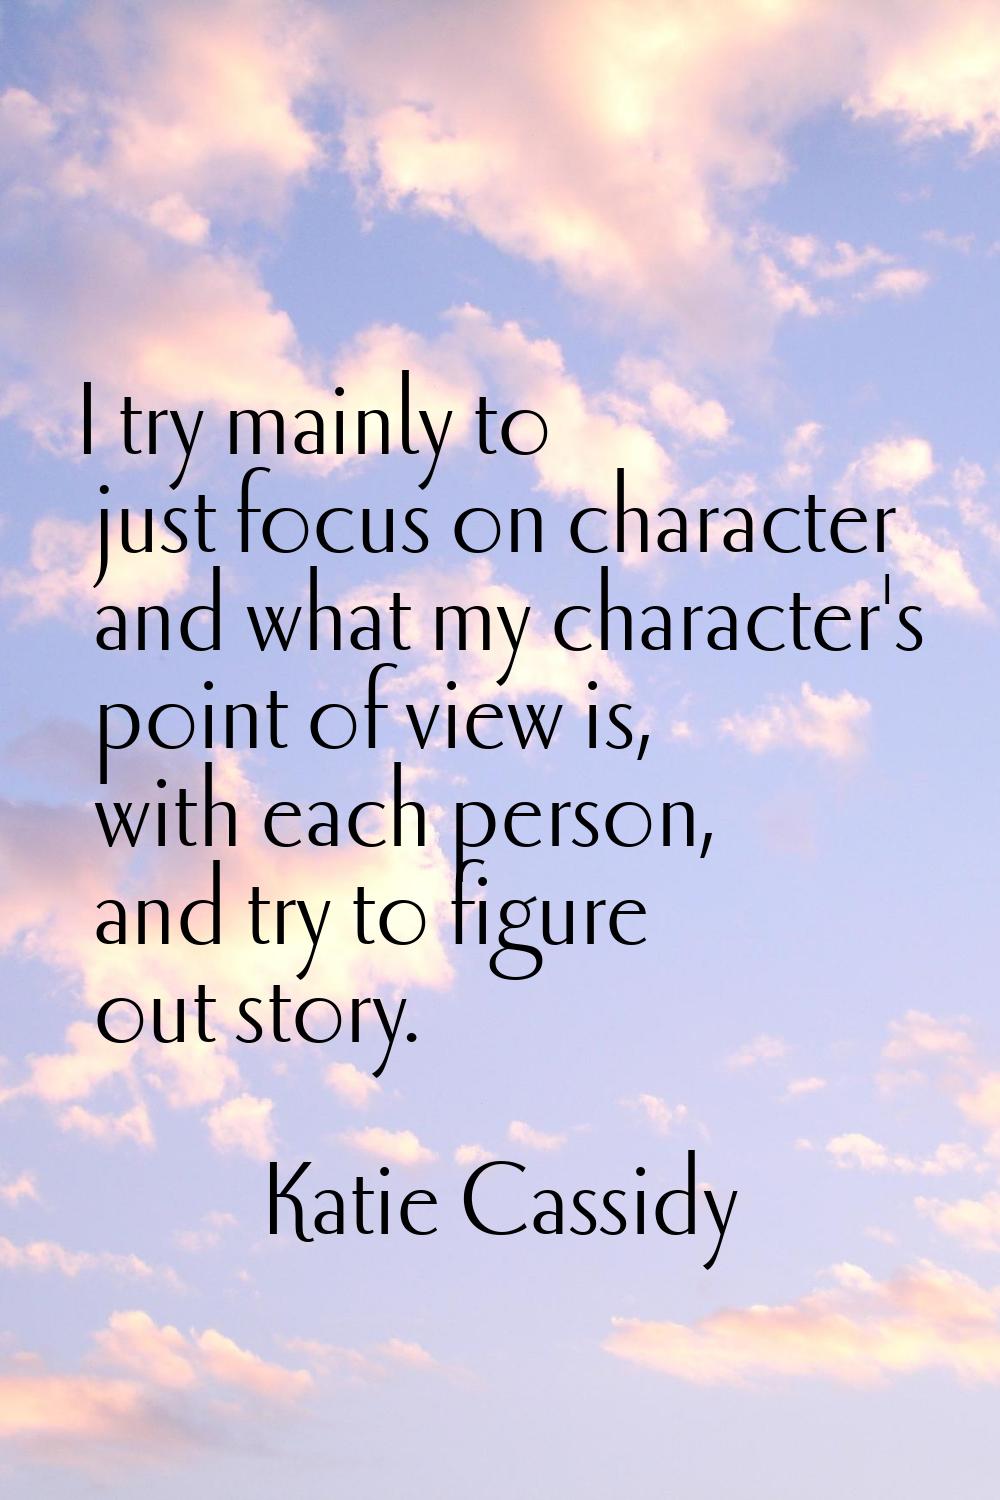 I try mainly to just focus on character and what my character's point of view is, with each person,